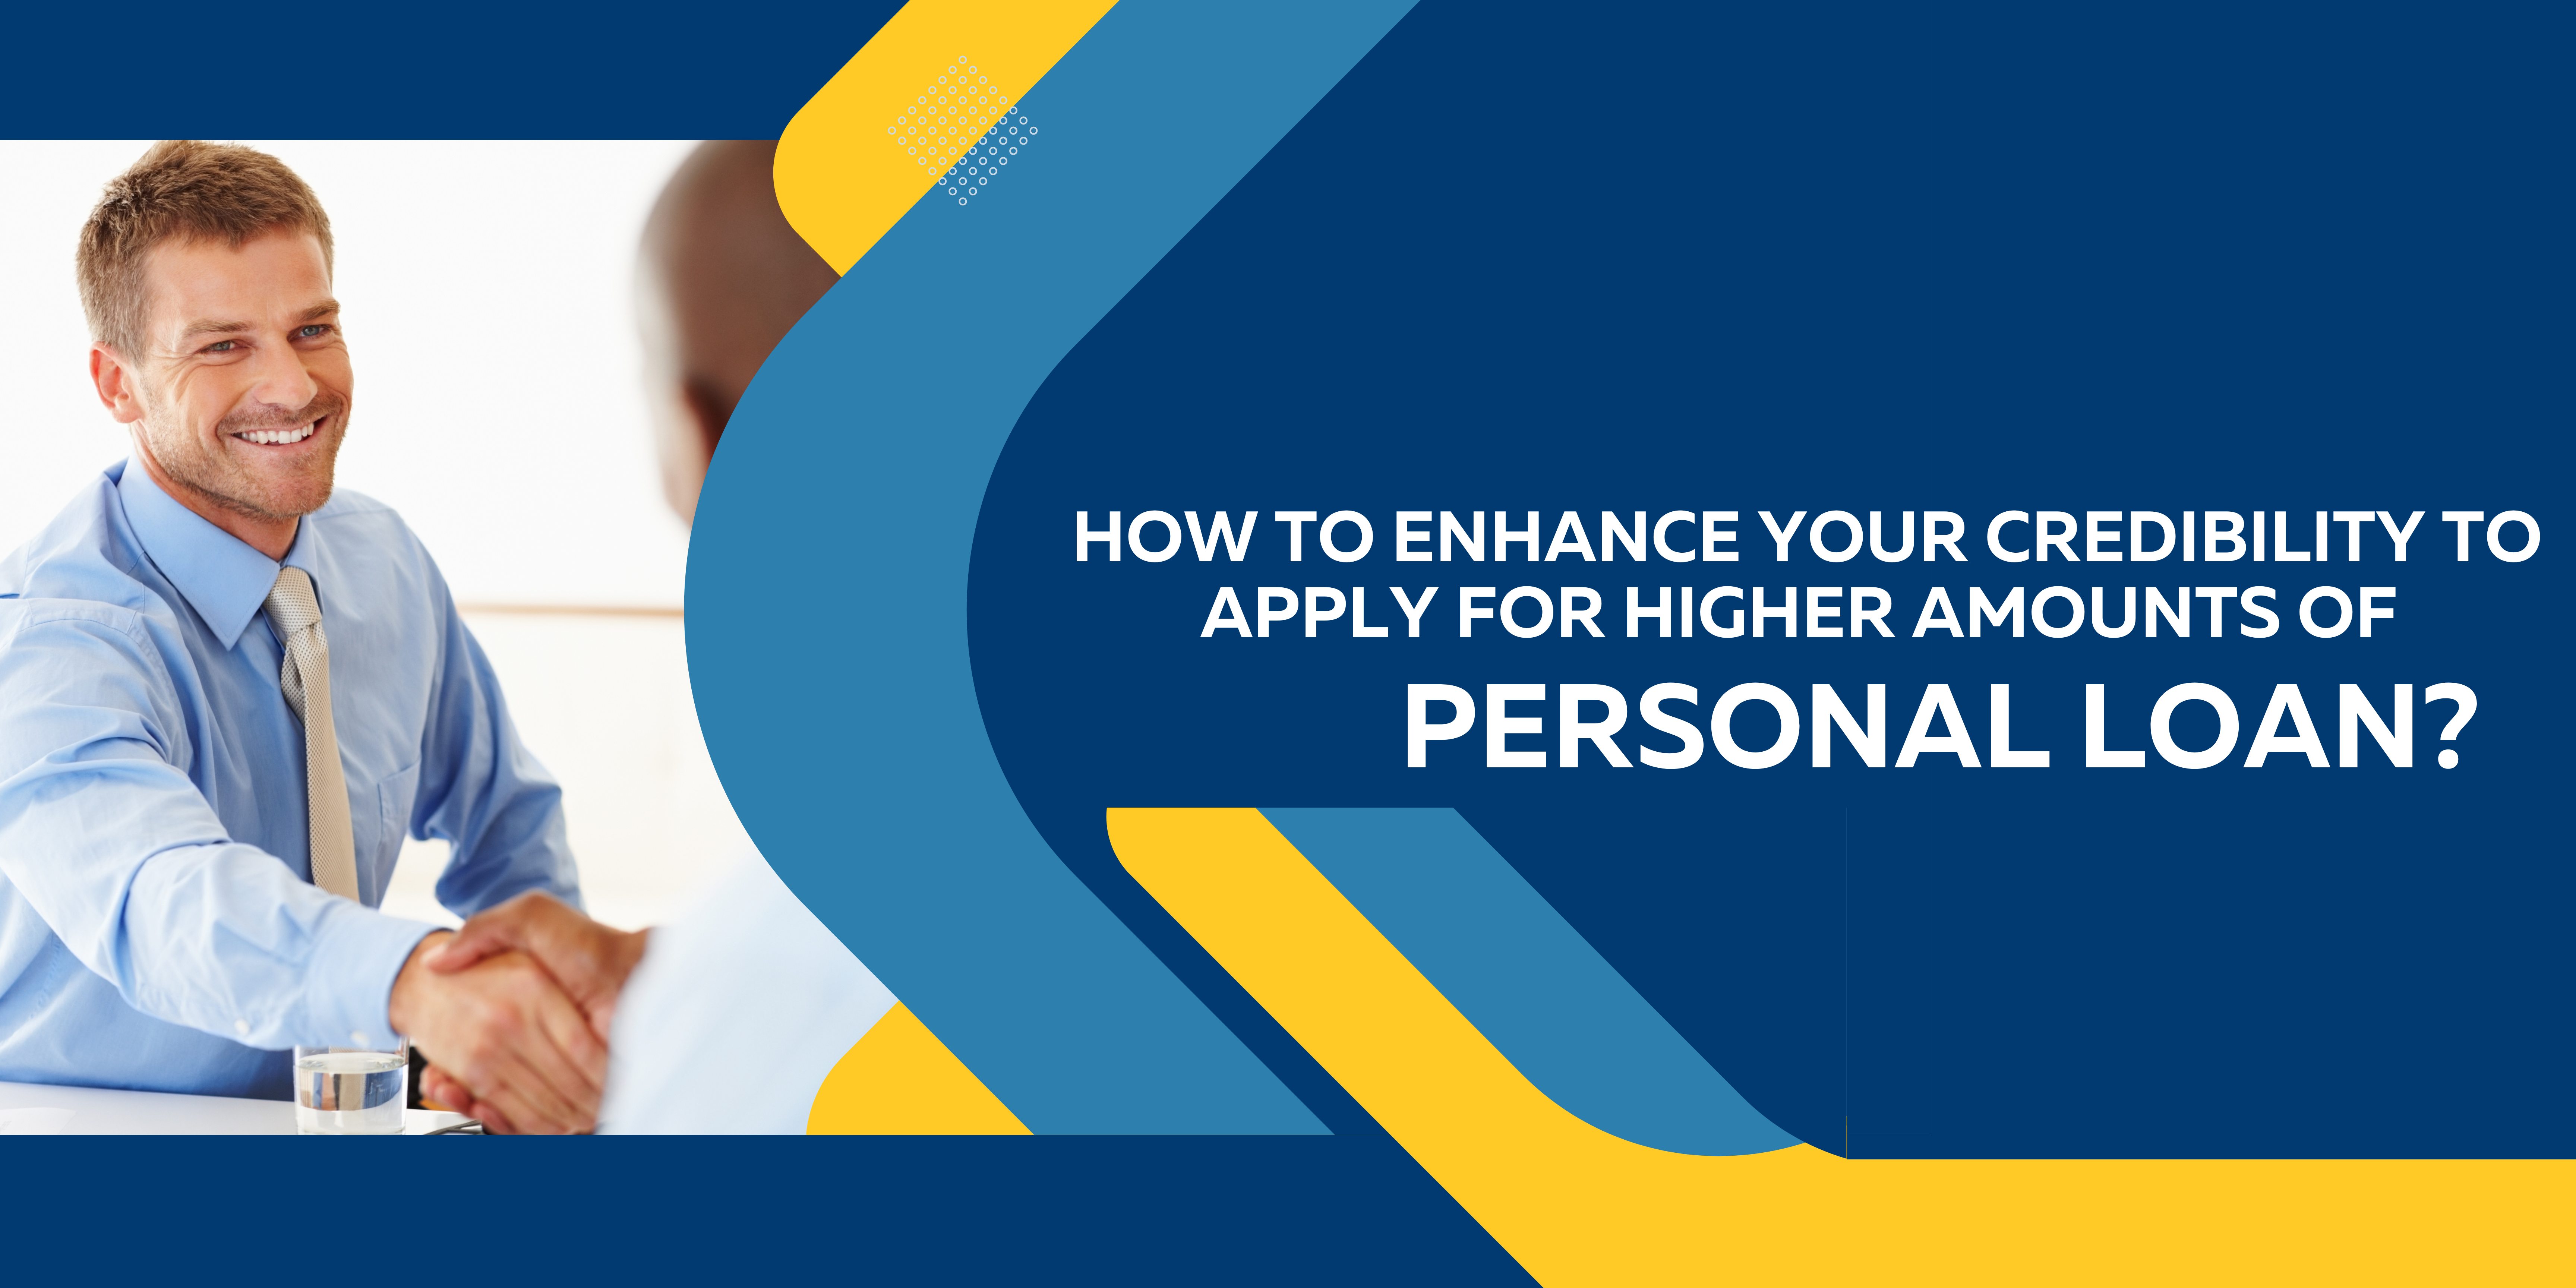 How to enhance your credibility to apply for higher amounts of personal loans?